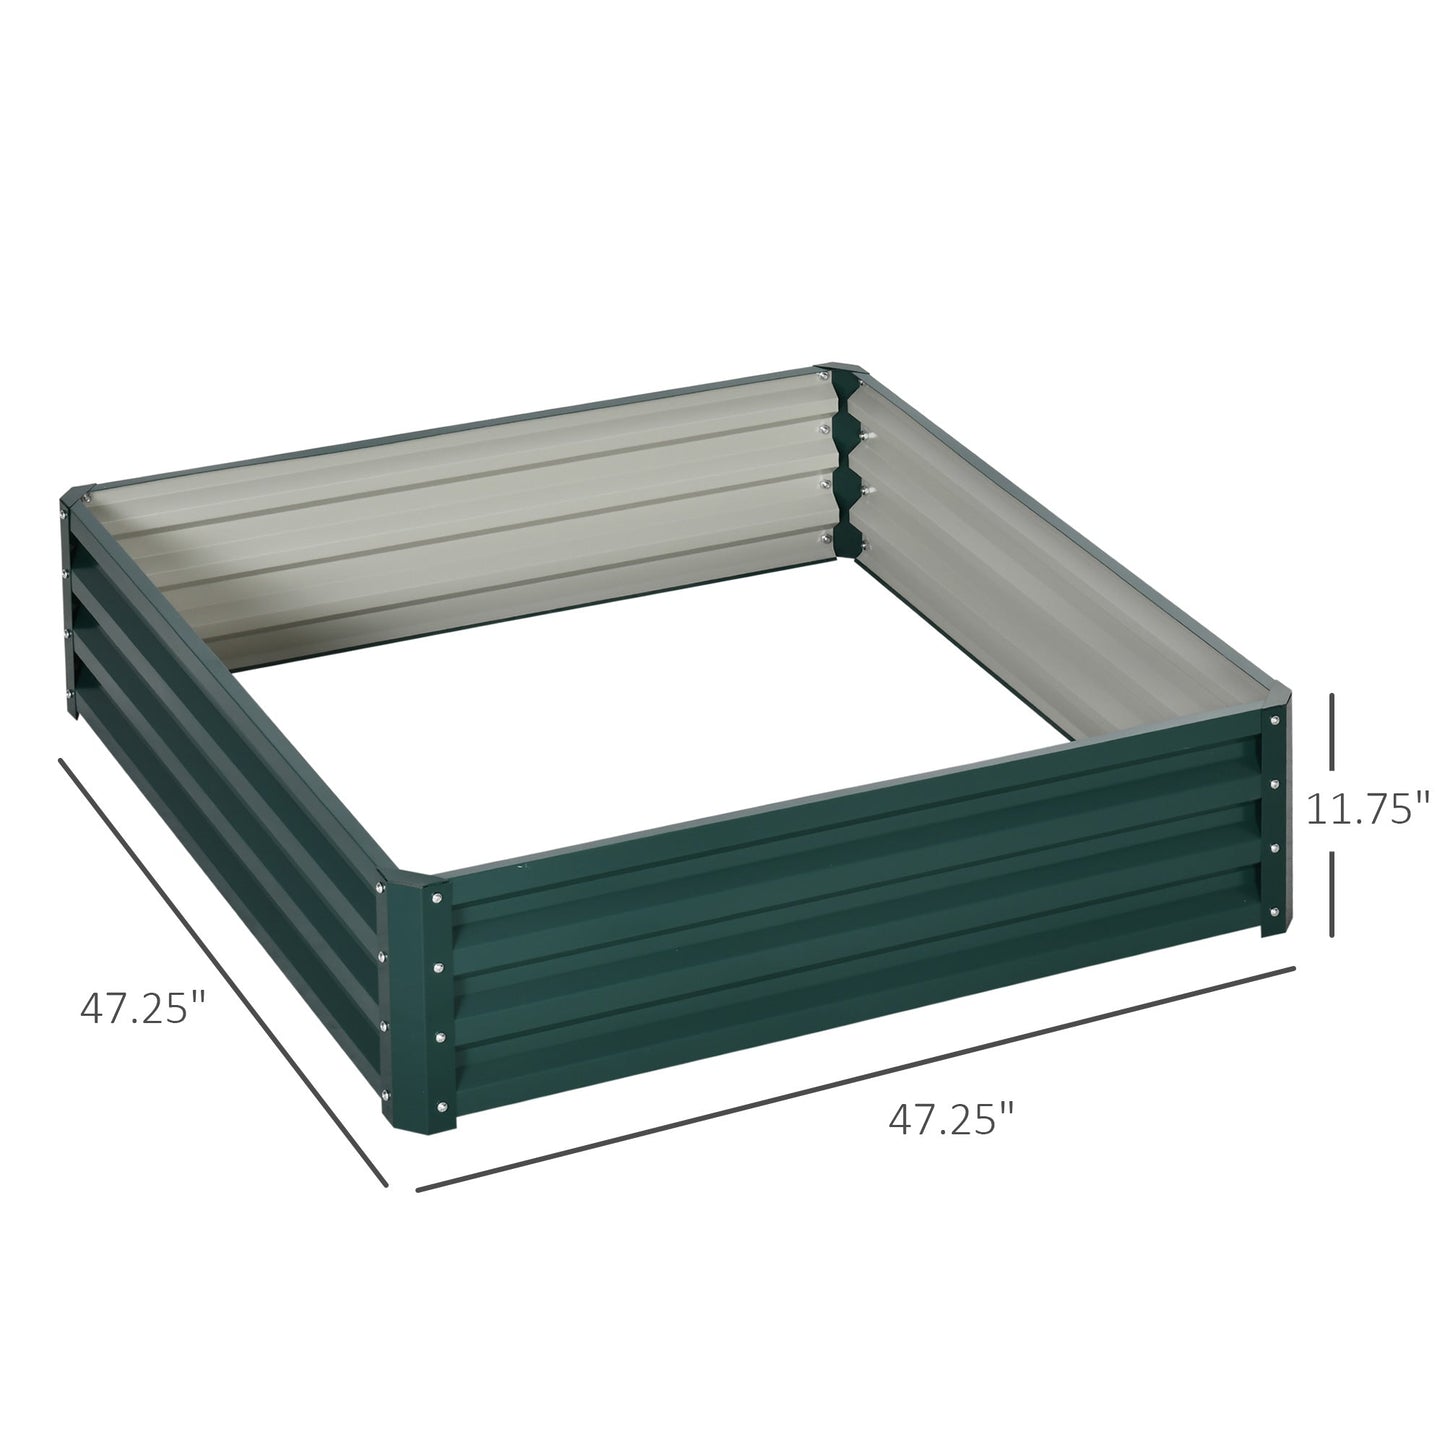 -Outsunny 4' x 4' x 1' Galvanized Raised Garden Bed, Planter Raised Bed with Steel Frame for Vegetables, Flowers, Plants and Herbs, Green - Outdoor Style Company